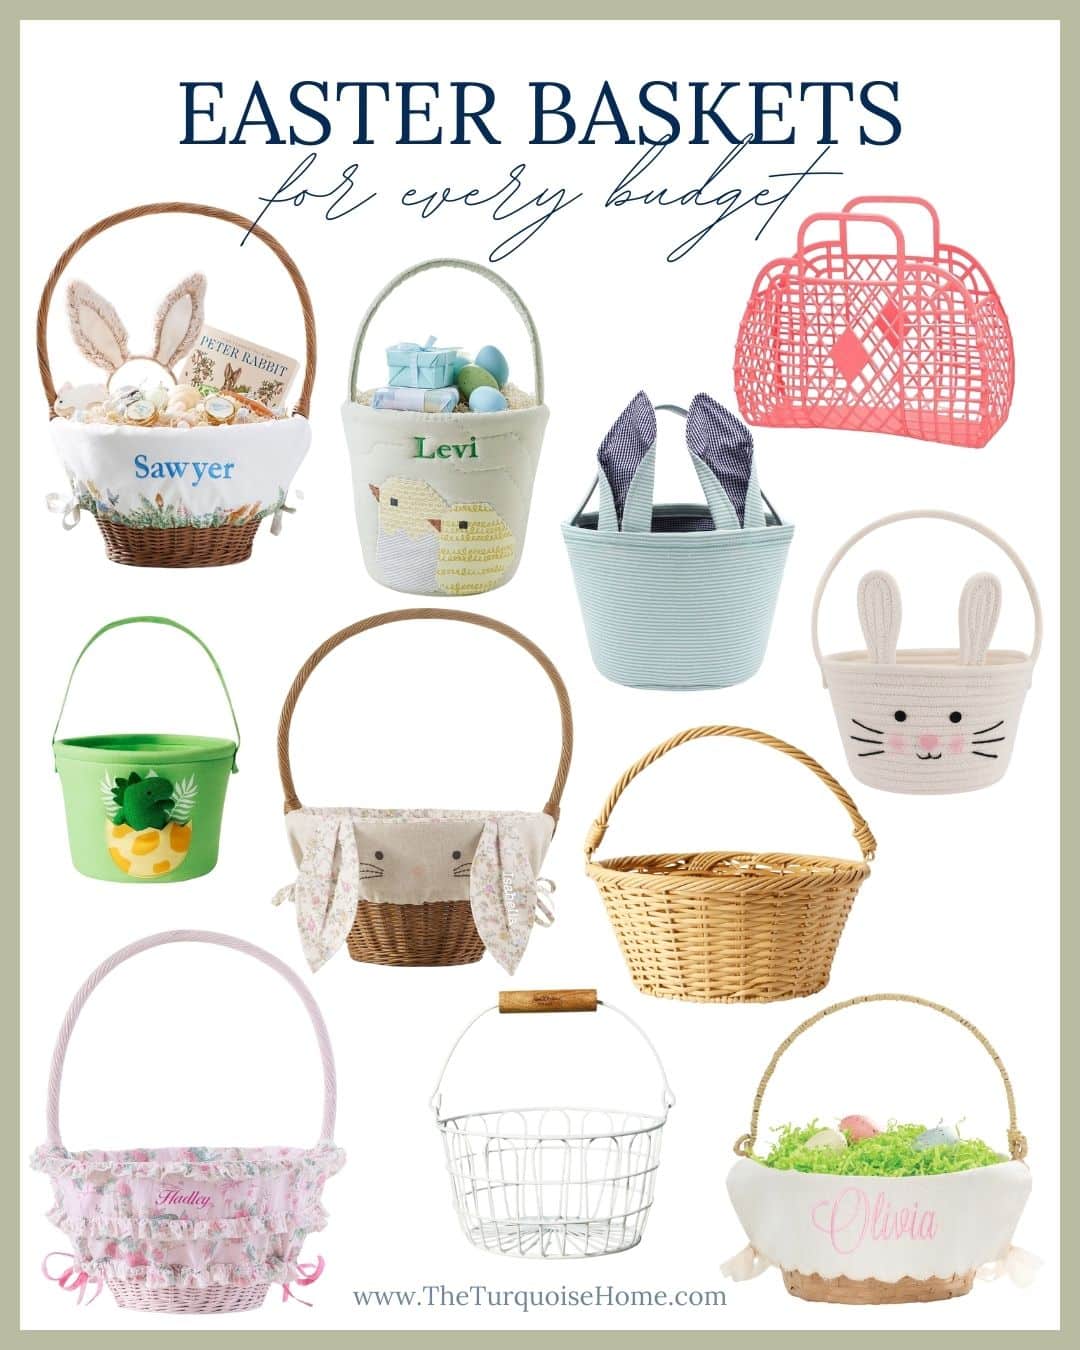 Easter Baskets for Every Budget